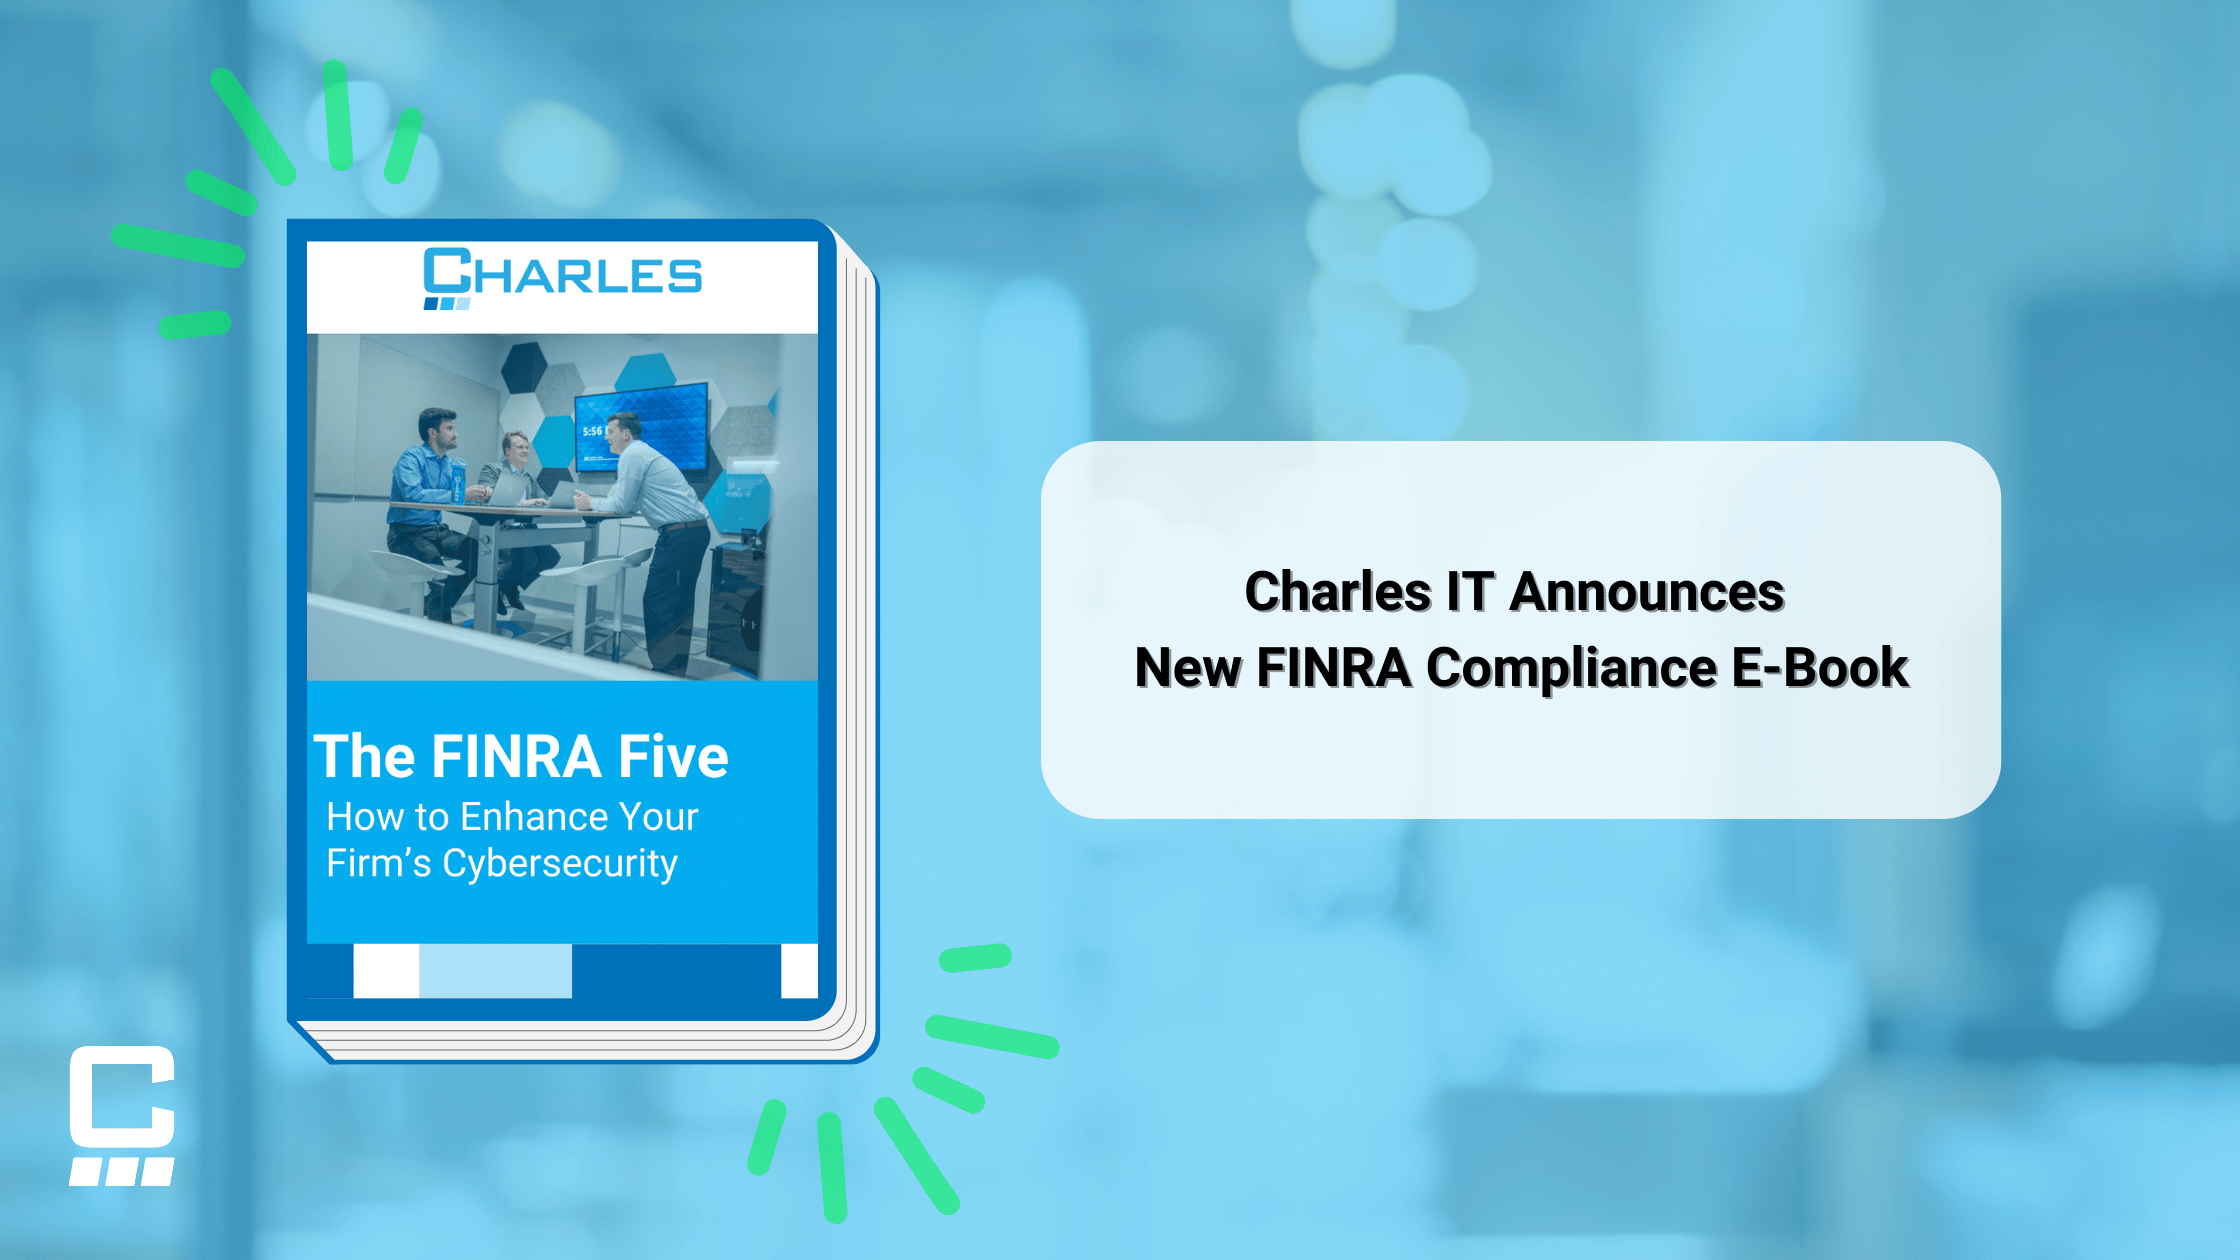 Charles IT Announces New FINRA Compliance E-Book